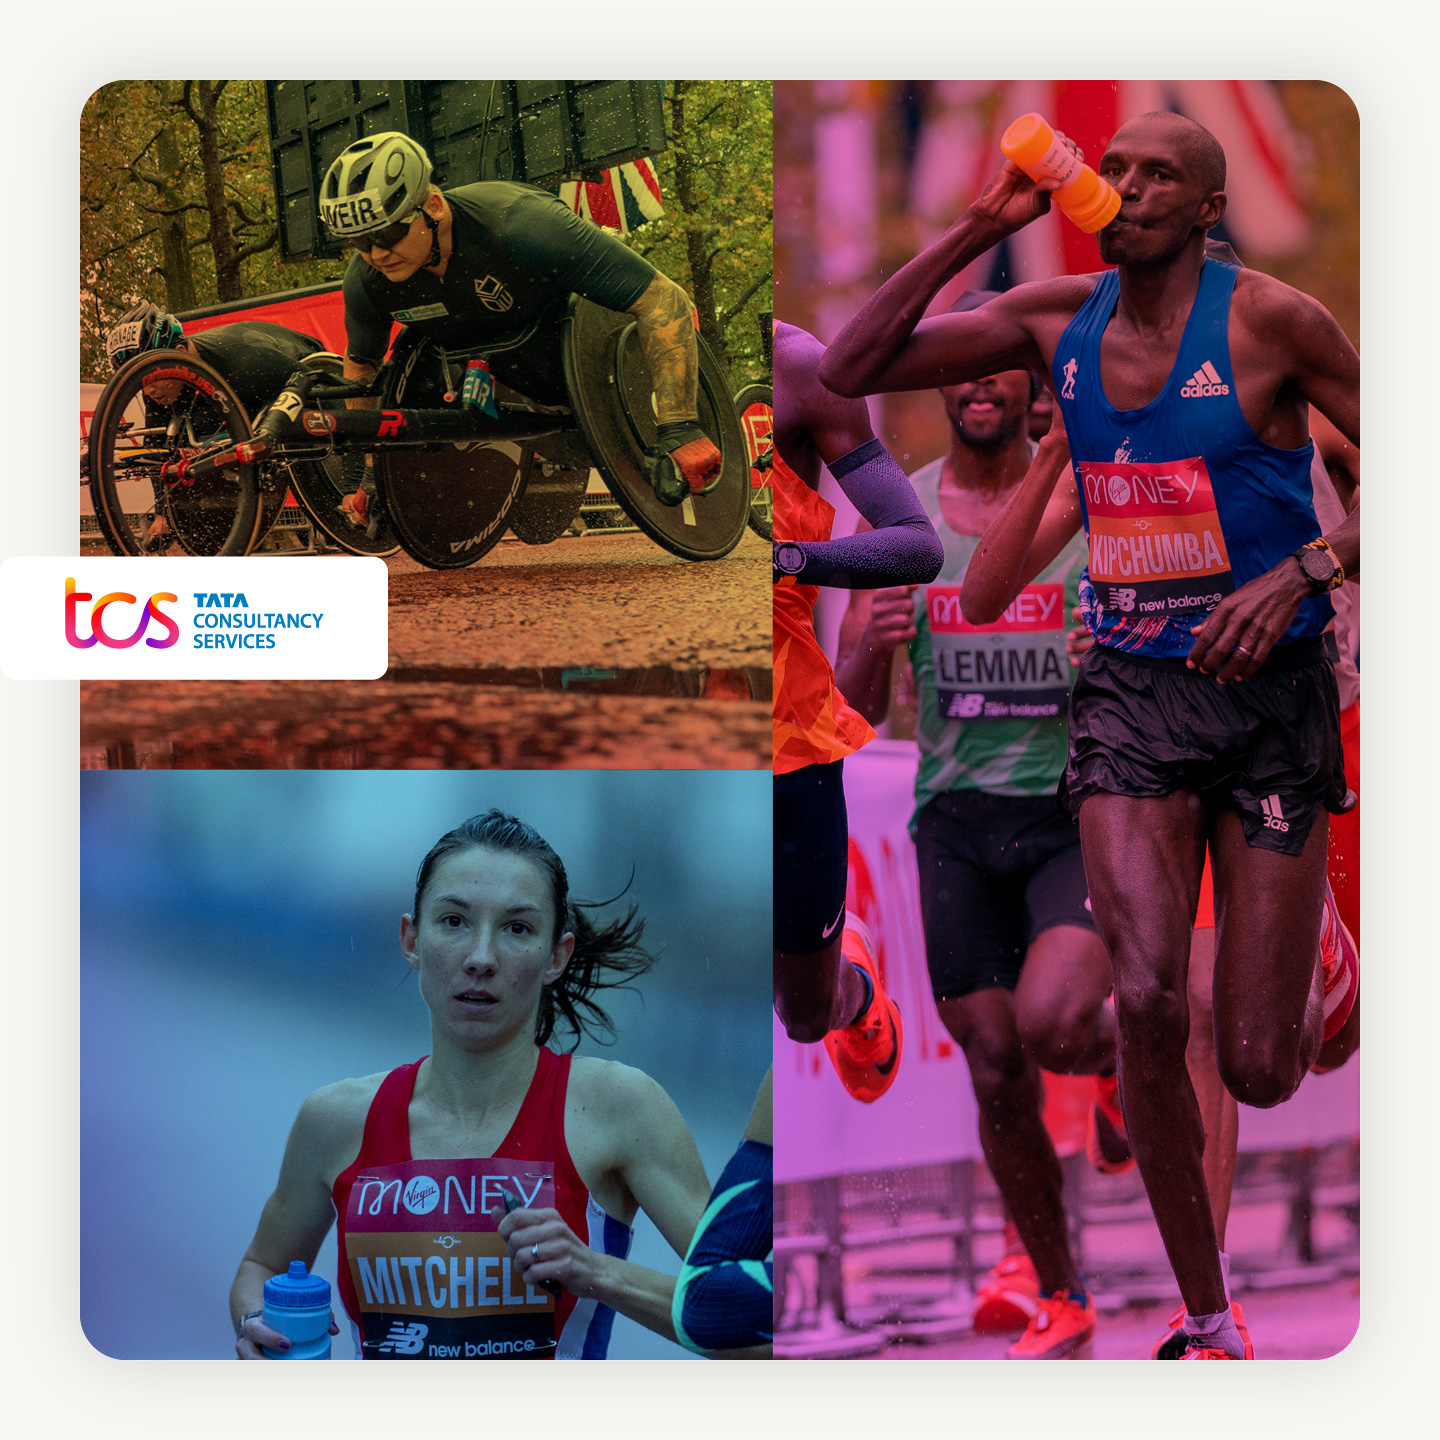 Images the London Marathon which TCS are title sponsors of. 